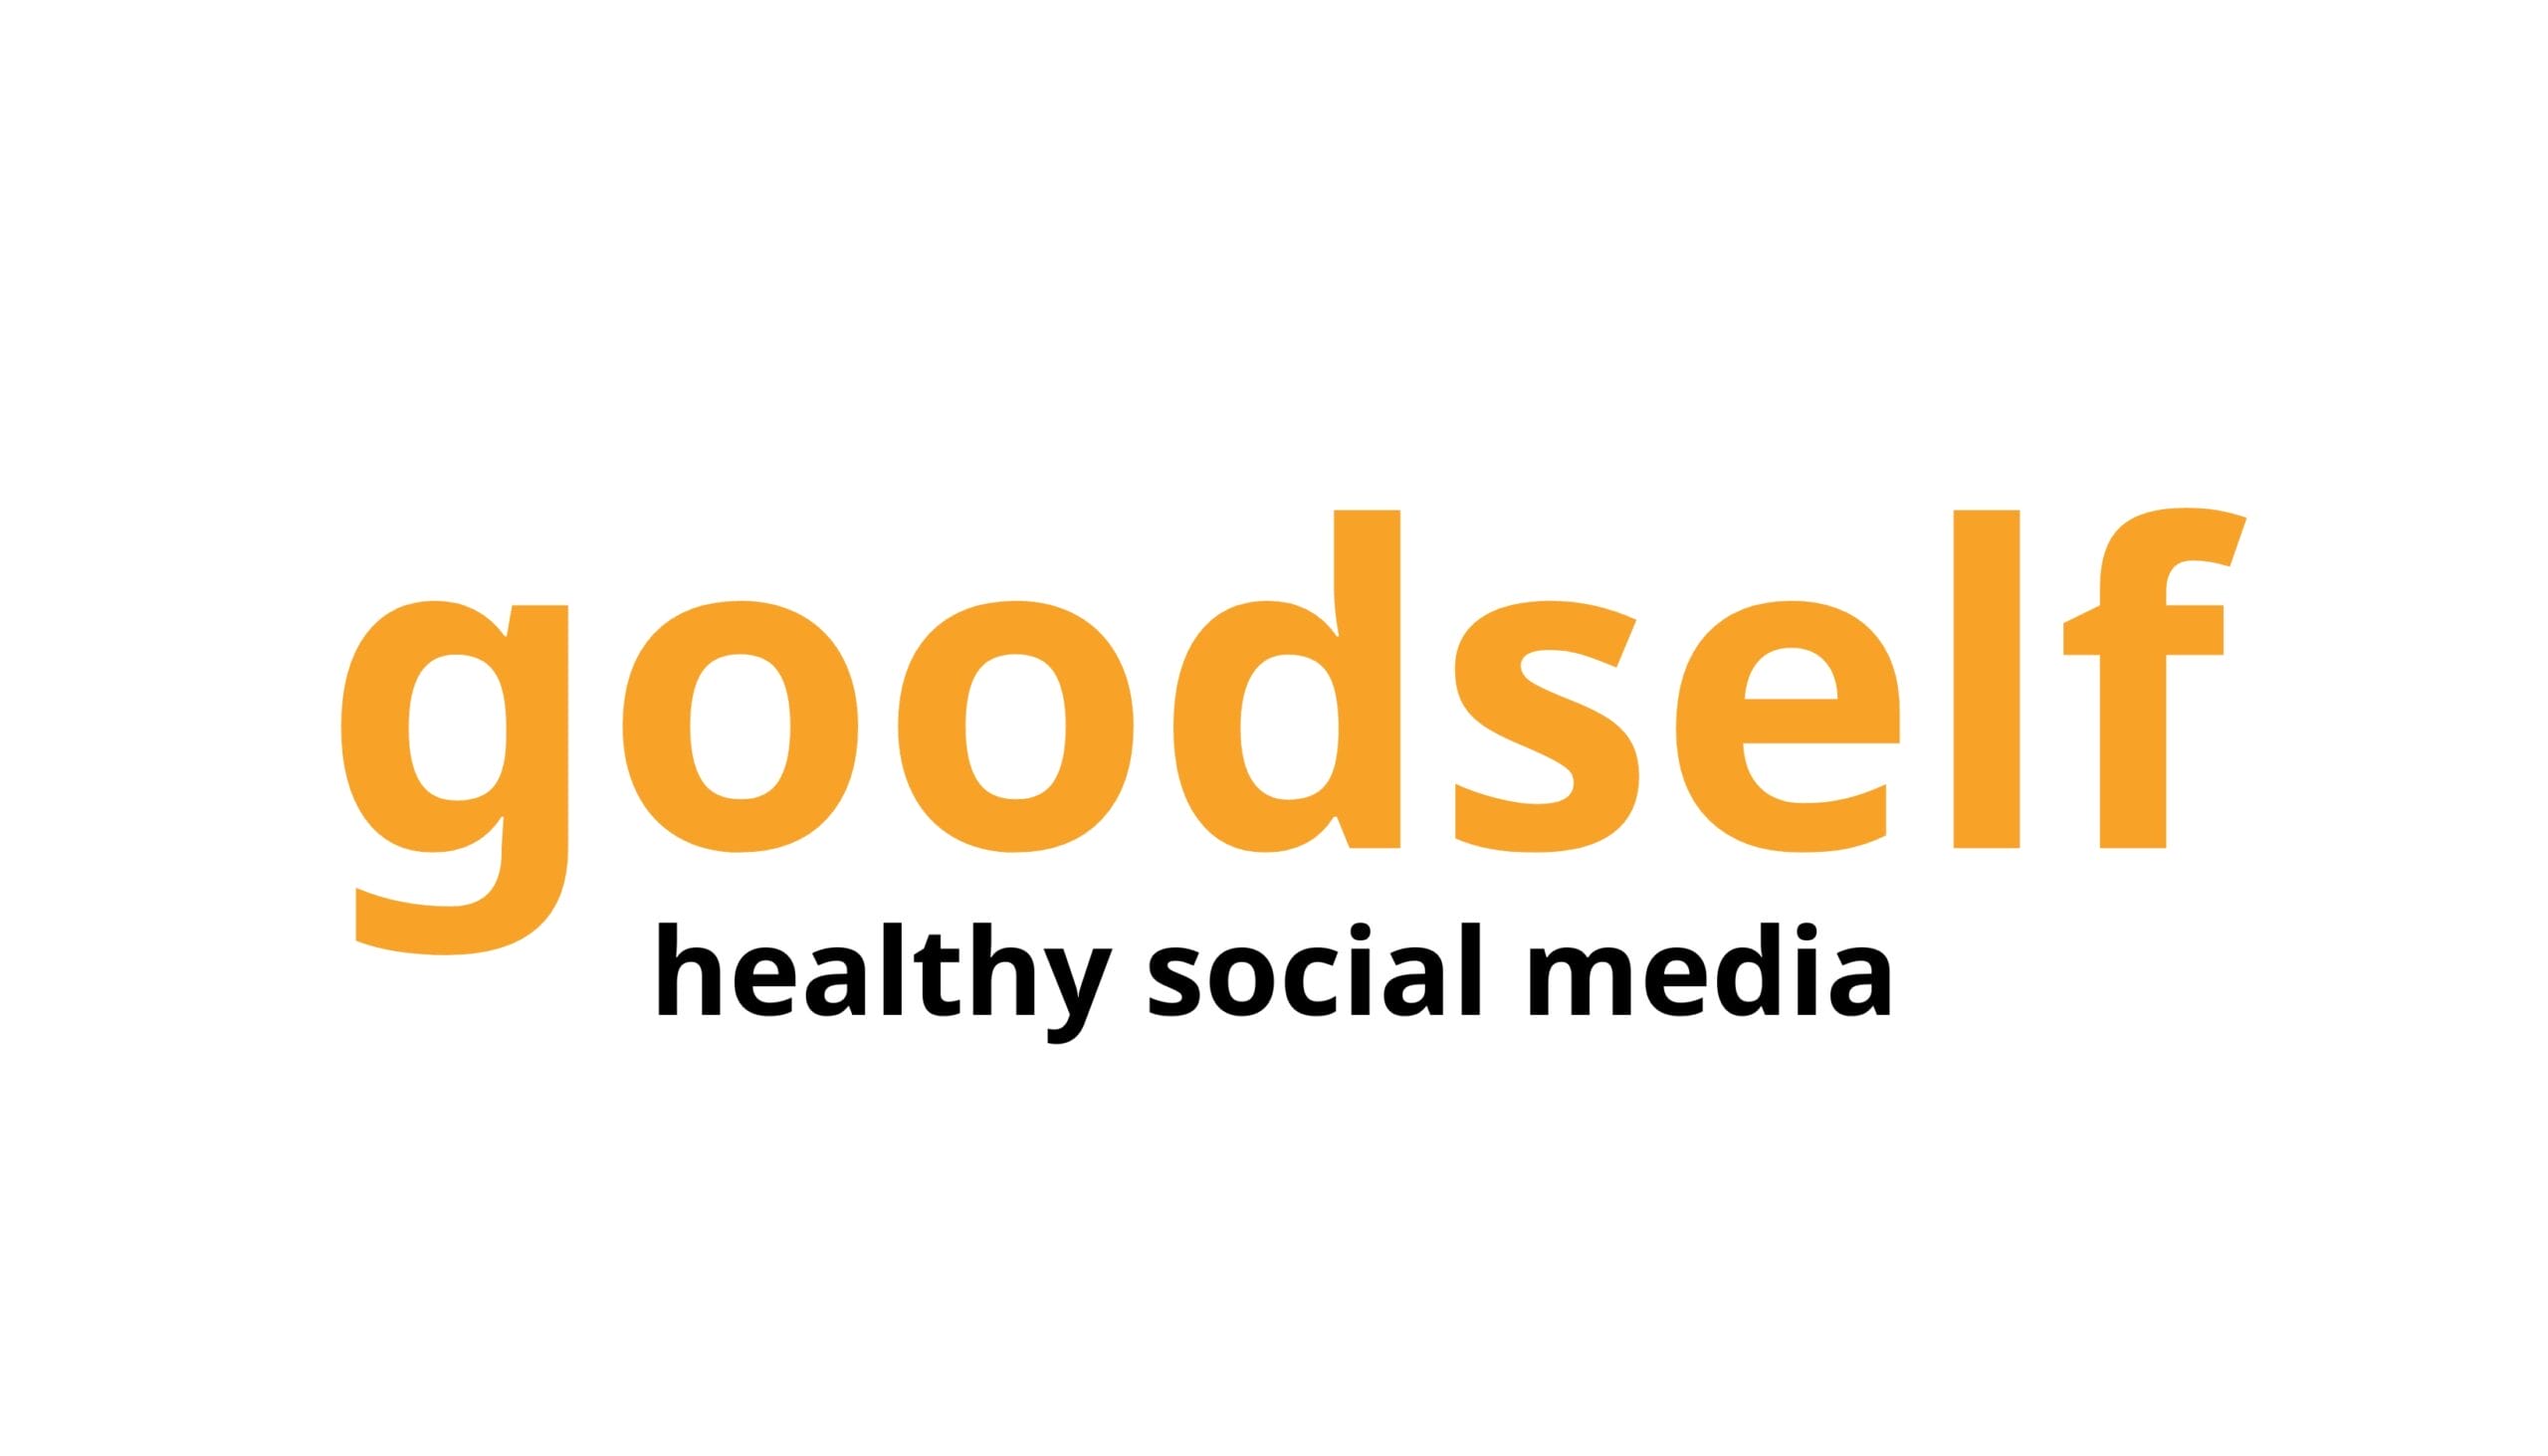 Logo with the word "goodself" in orange lowercase letters and the slogan "healthy social media" in black lowercase letters underneath.